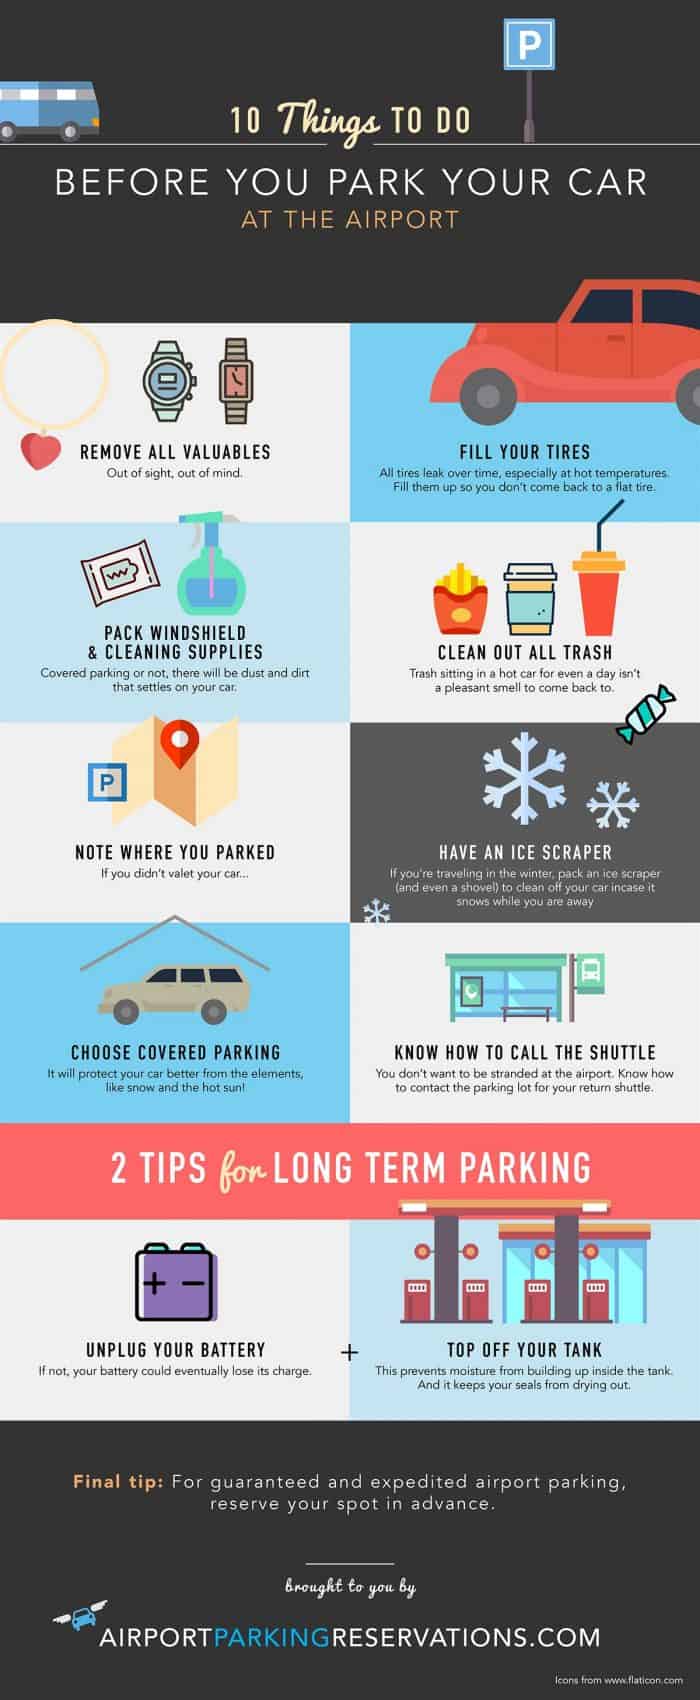 10 Things To Do Before You Park At The Airport